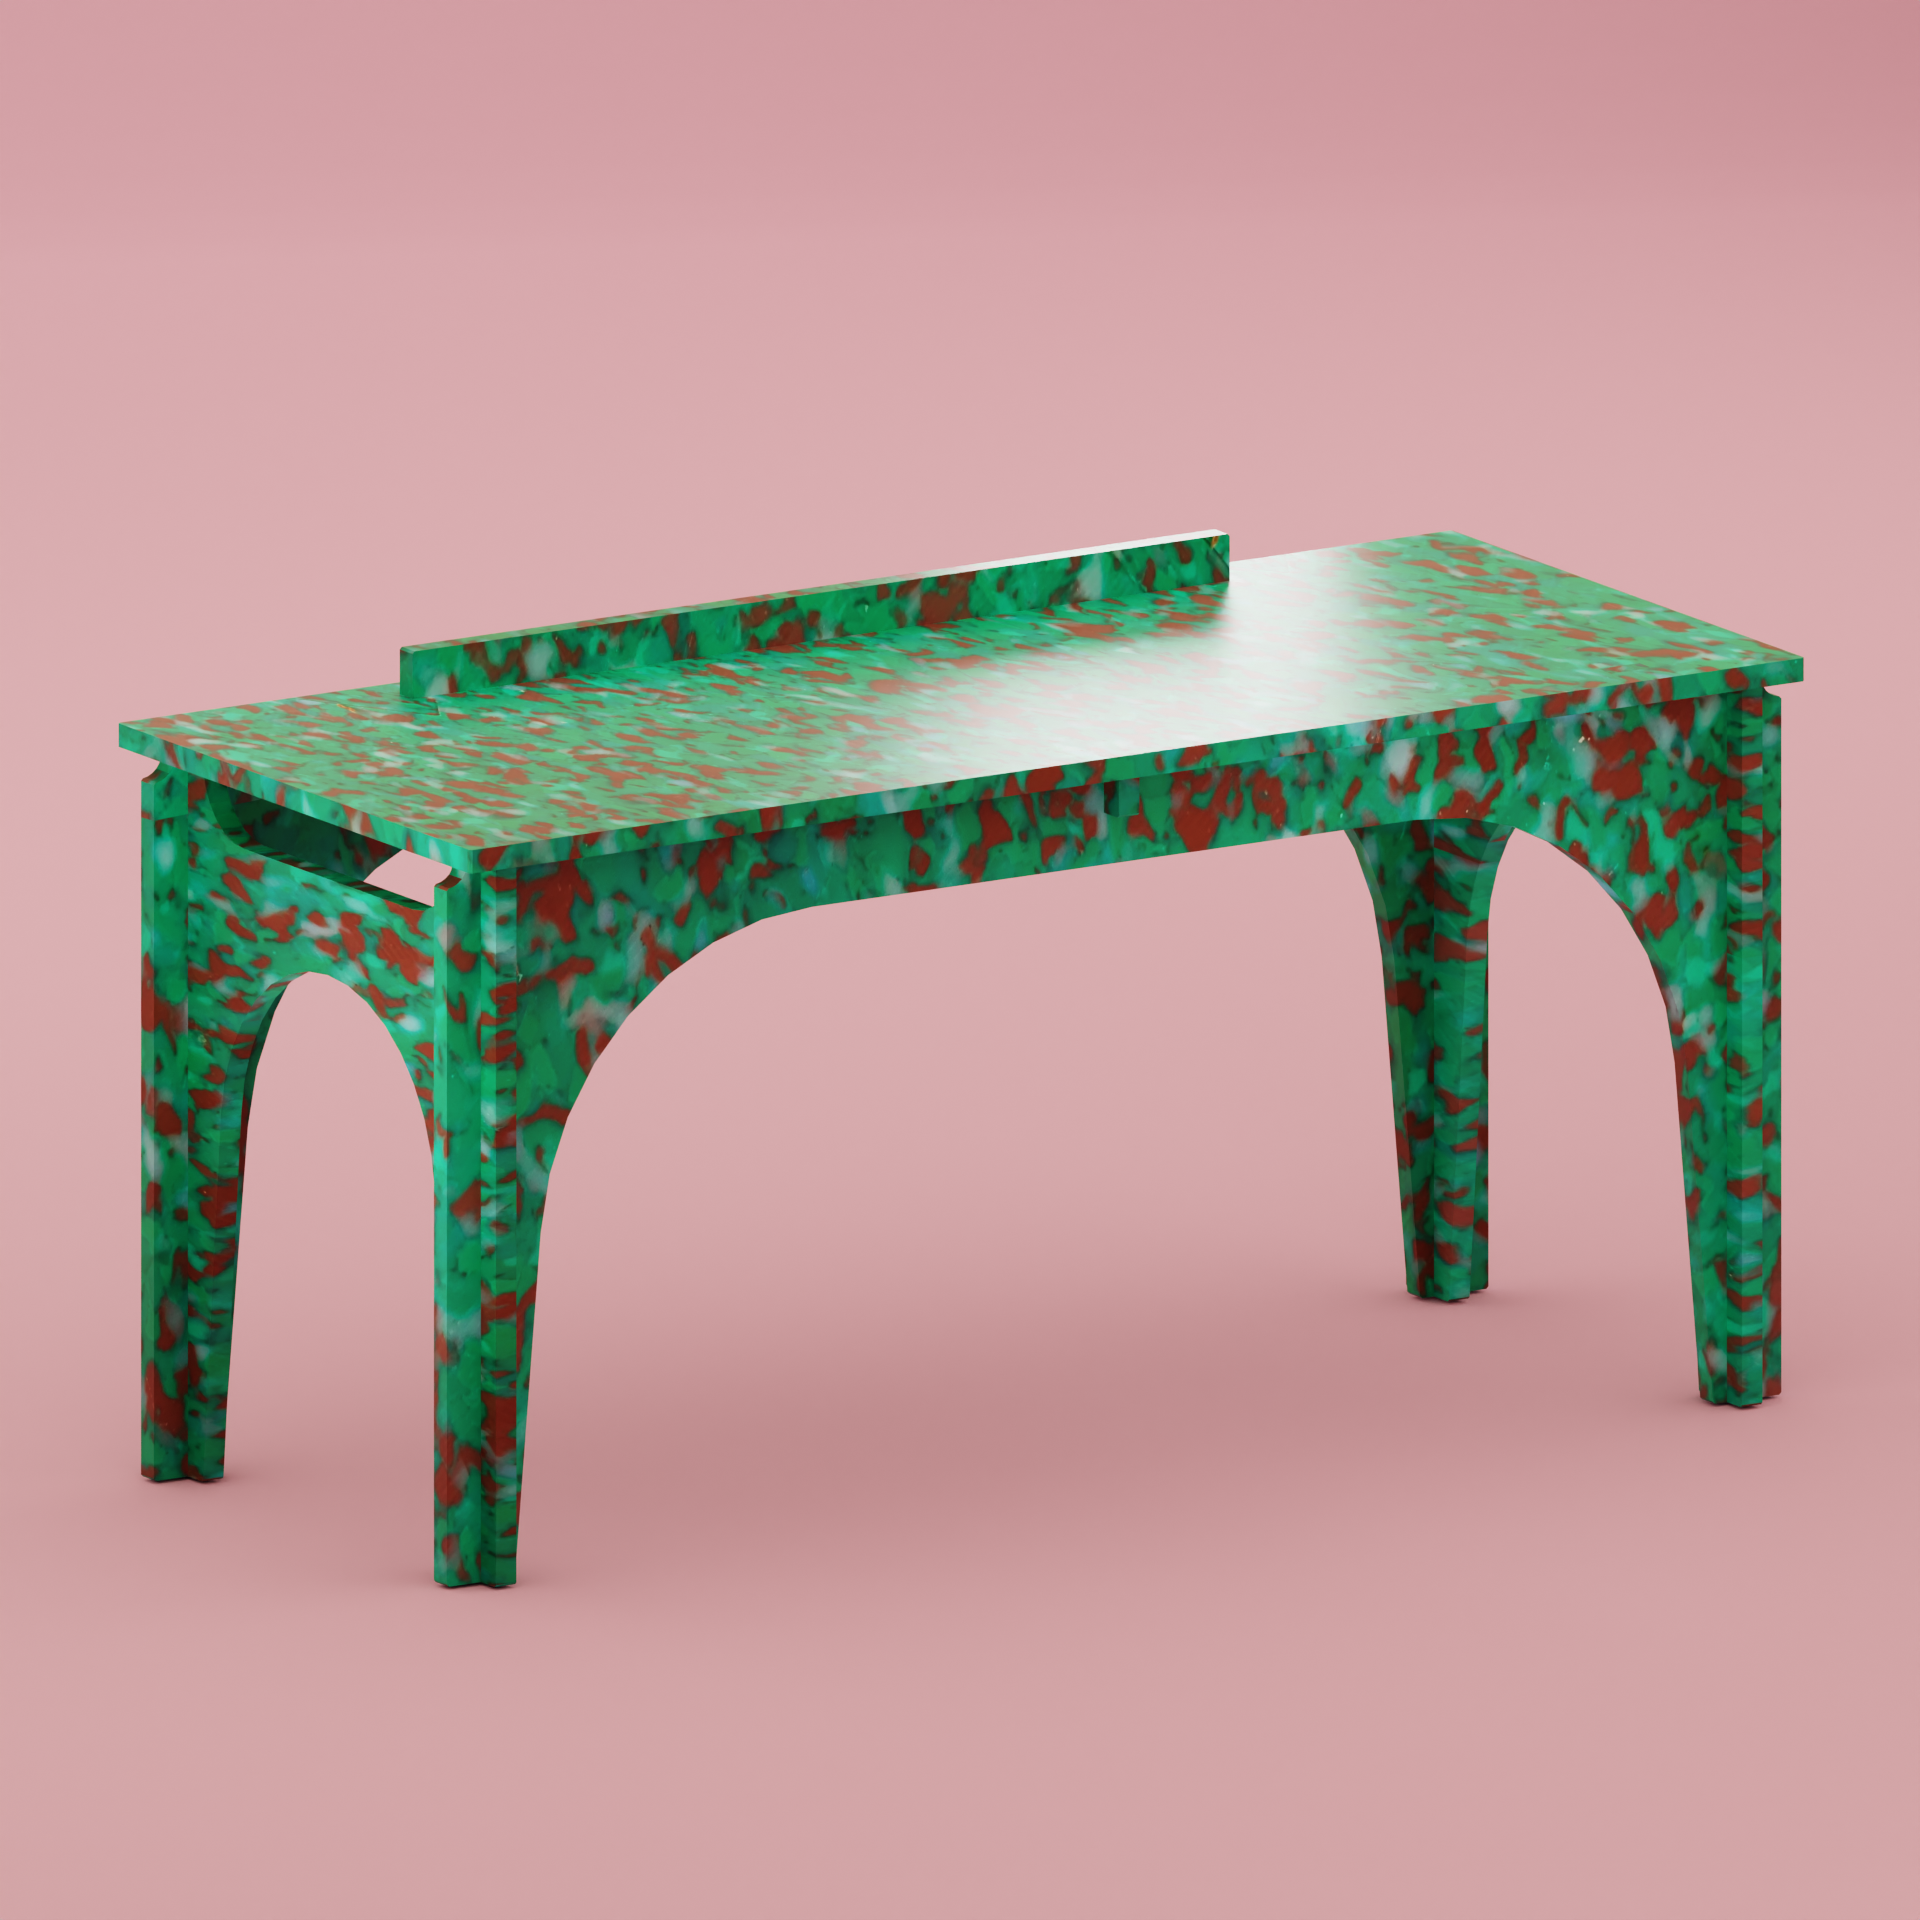 RENDER OF GREEN BENCH KIDS DESK BY THE MINIMONO PROJECT - BRAND FOR ECO FRIENDLY - PLAYFUL - MULTI FUNCTIONAL - SUSTAINABLE - HIGH QUALITY - DESIGN FURNITURE FROM RECYCLED PLASTIC FOR BOTH ADULT AND CHILDREN MADE IN BERLIN GERMANY